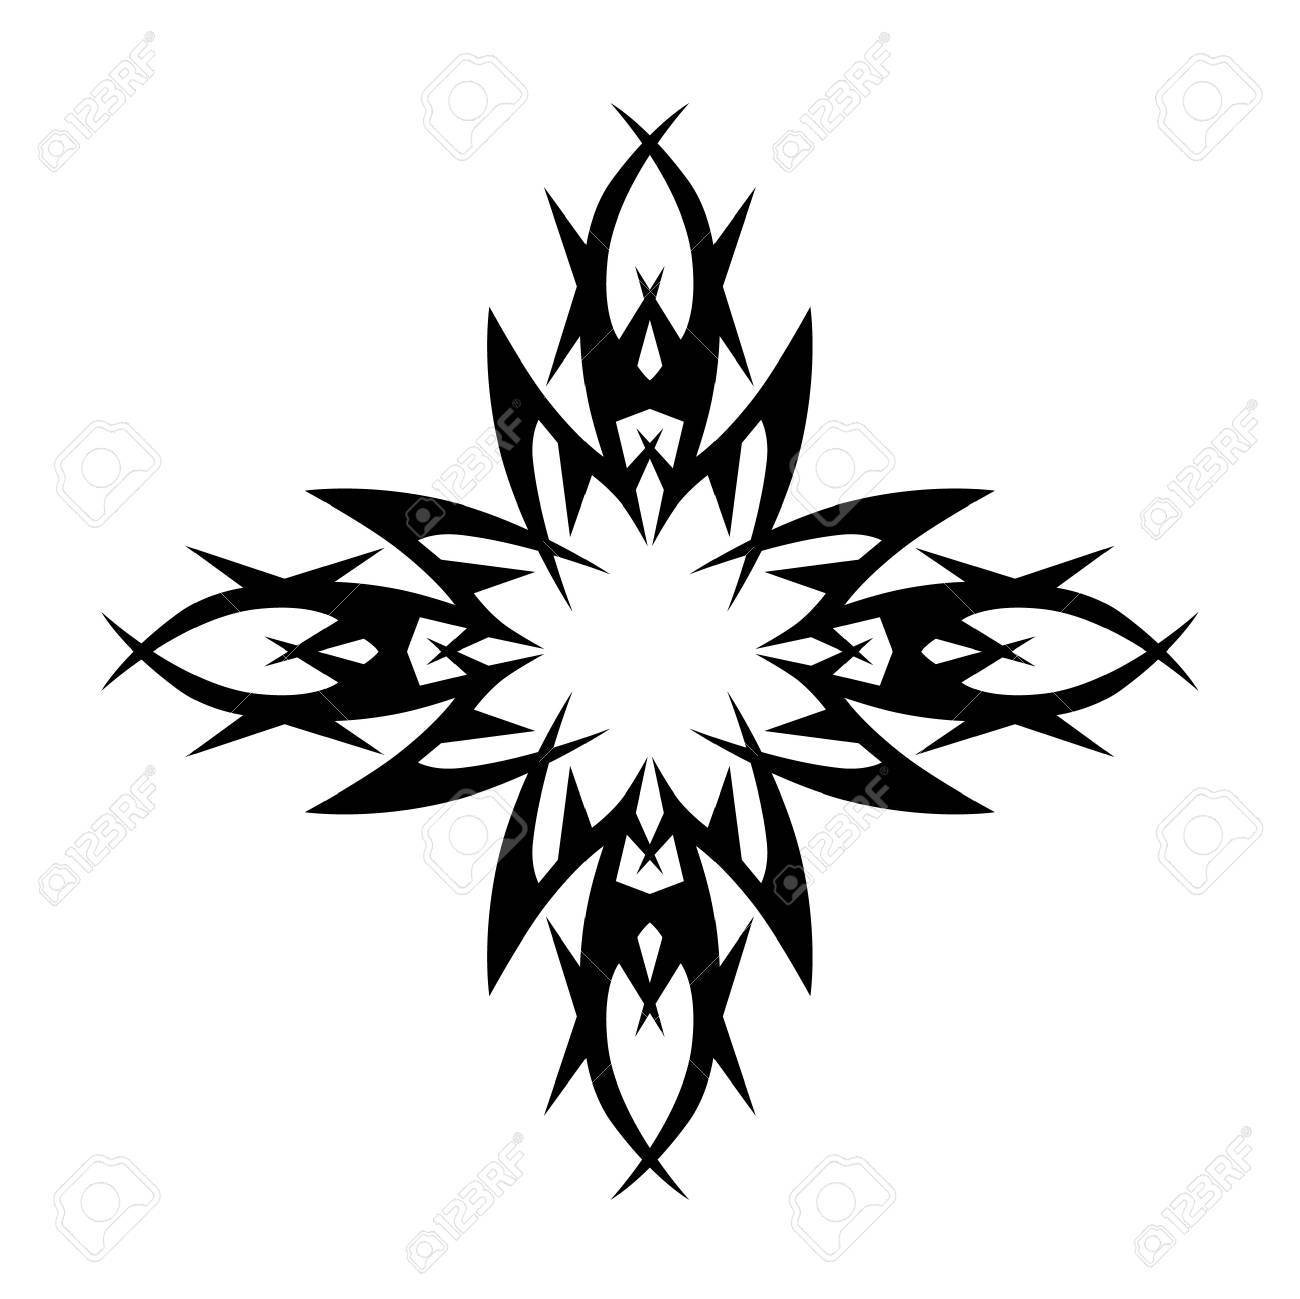 Tattoo Tribal Cross Designs Royalty Free Cliparts Vectors And for size 1300 X 1299